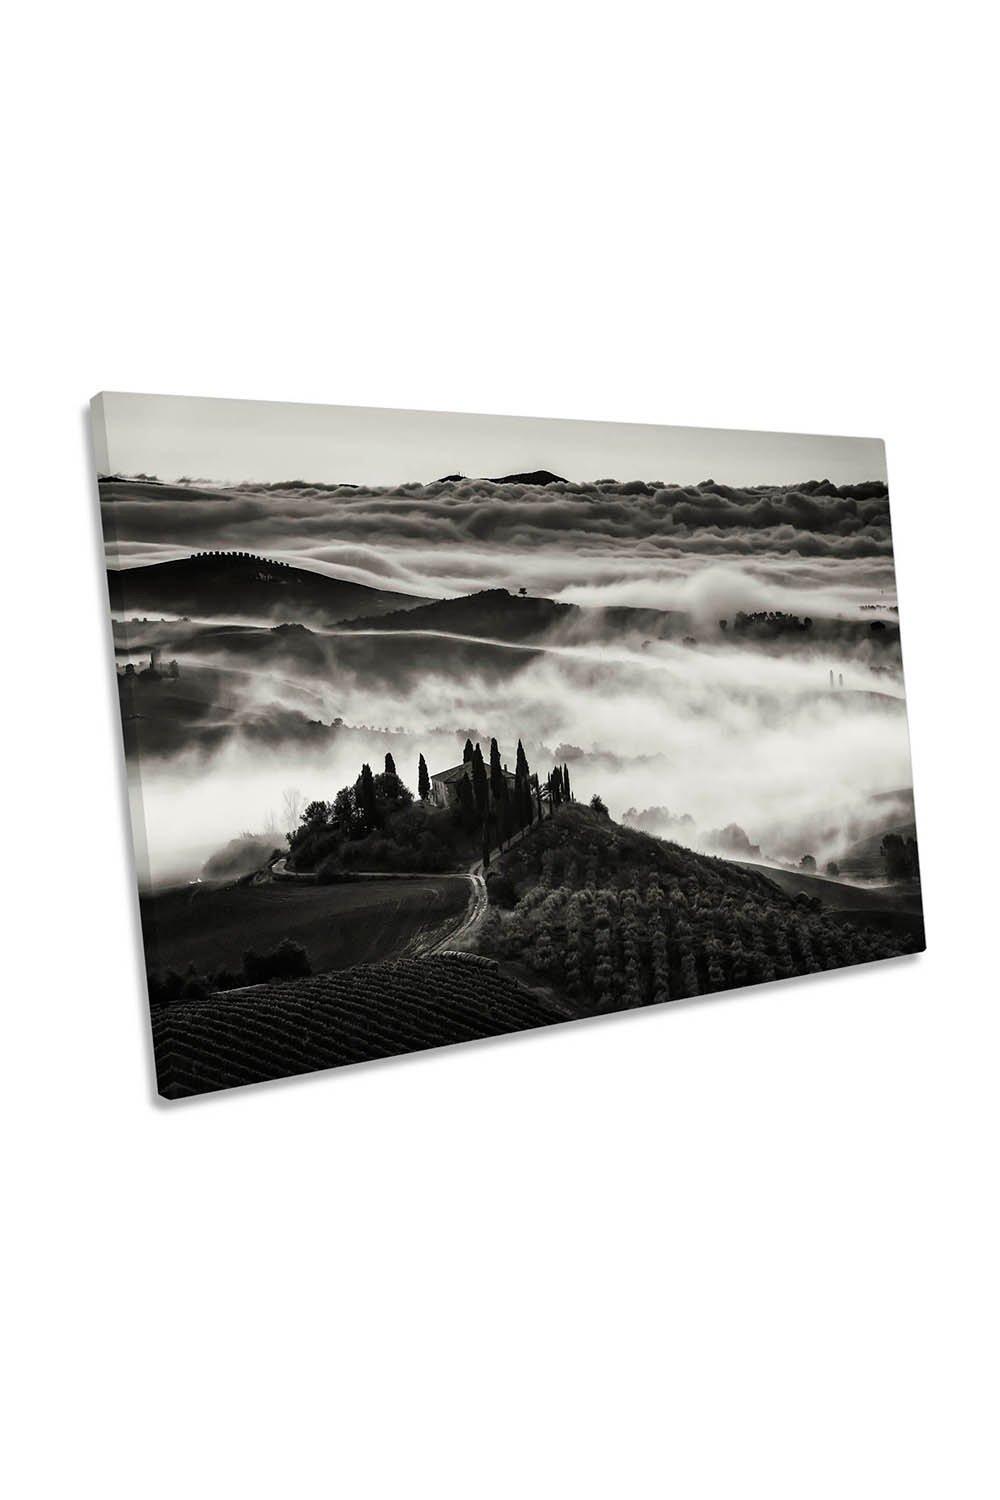 Tuscany Mist Morning Italy Landscape Canvas Wall Art Picture Print